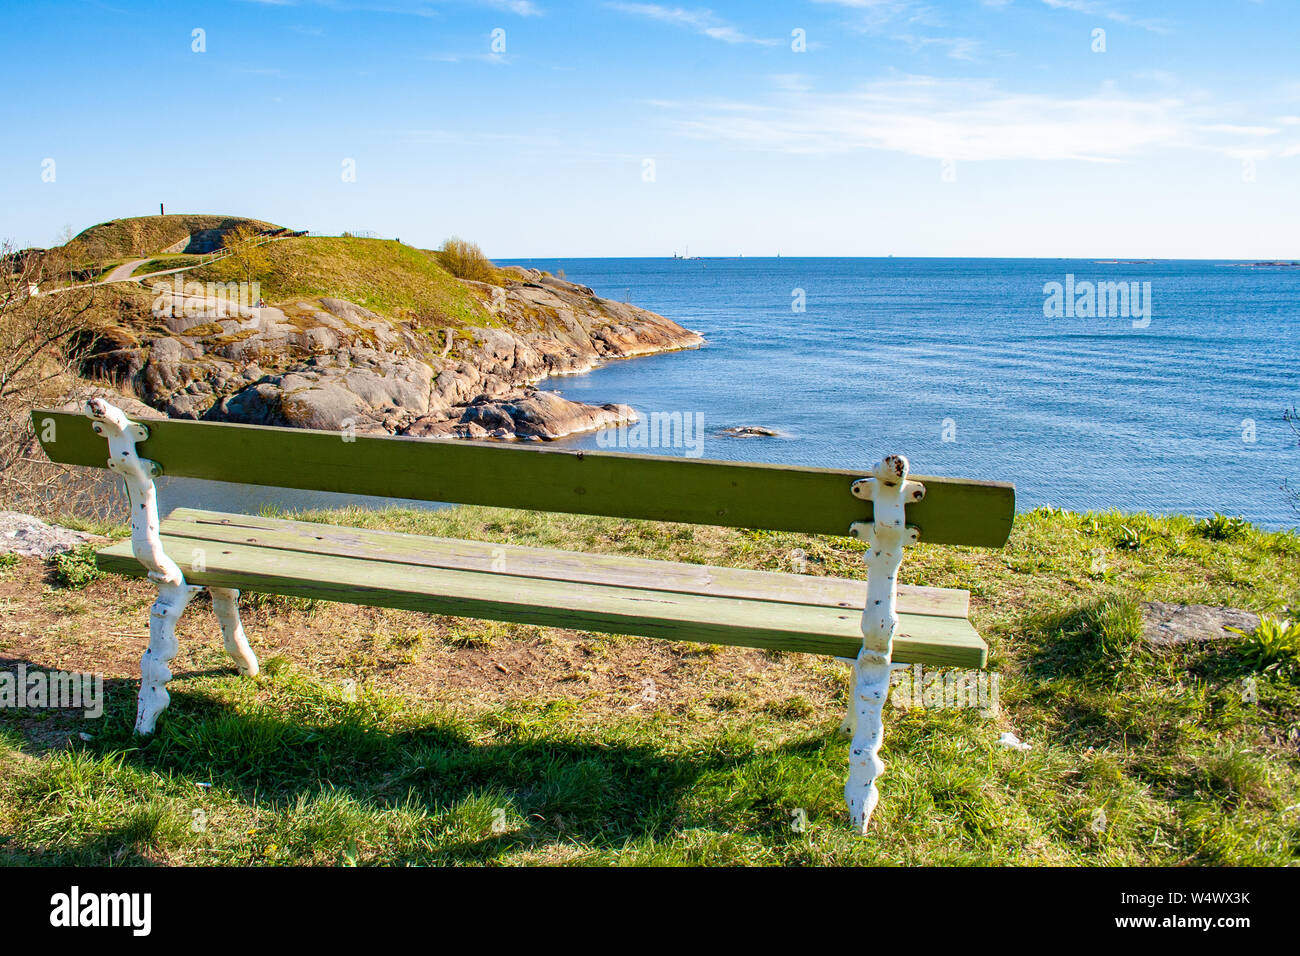 Beautiful finnish landscape, Suomenlinna, Helsinki, Helsingfors, Uusimaa, Finland with rocks and Baltic Sea with wooden bench Stock Photo